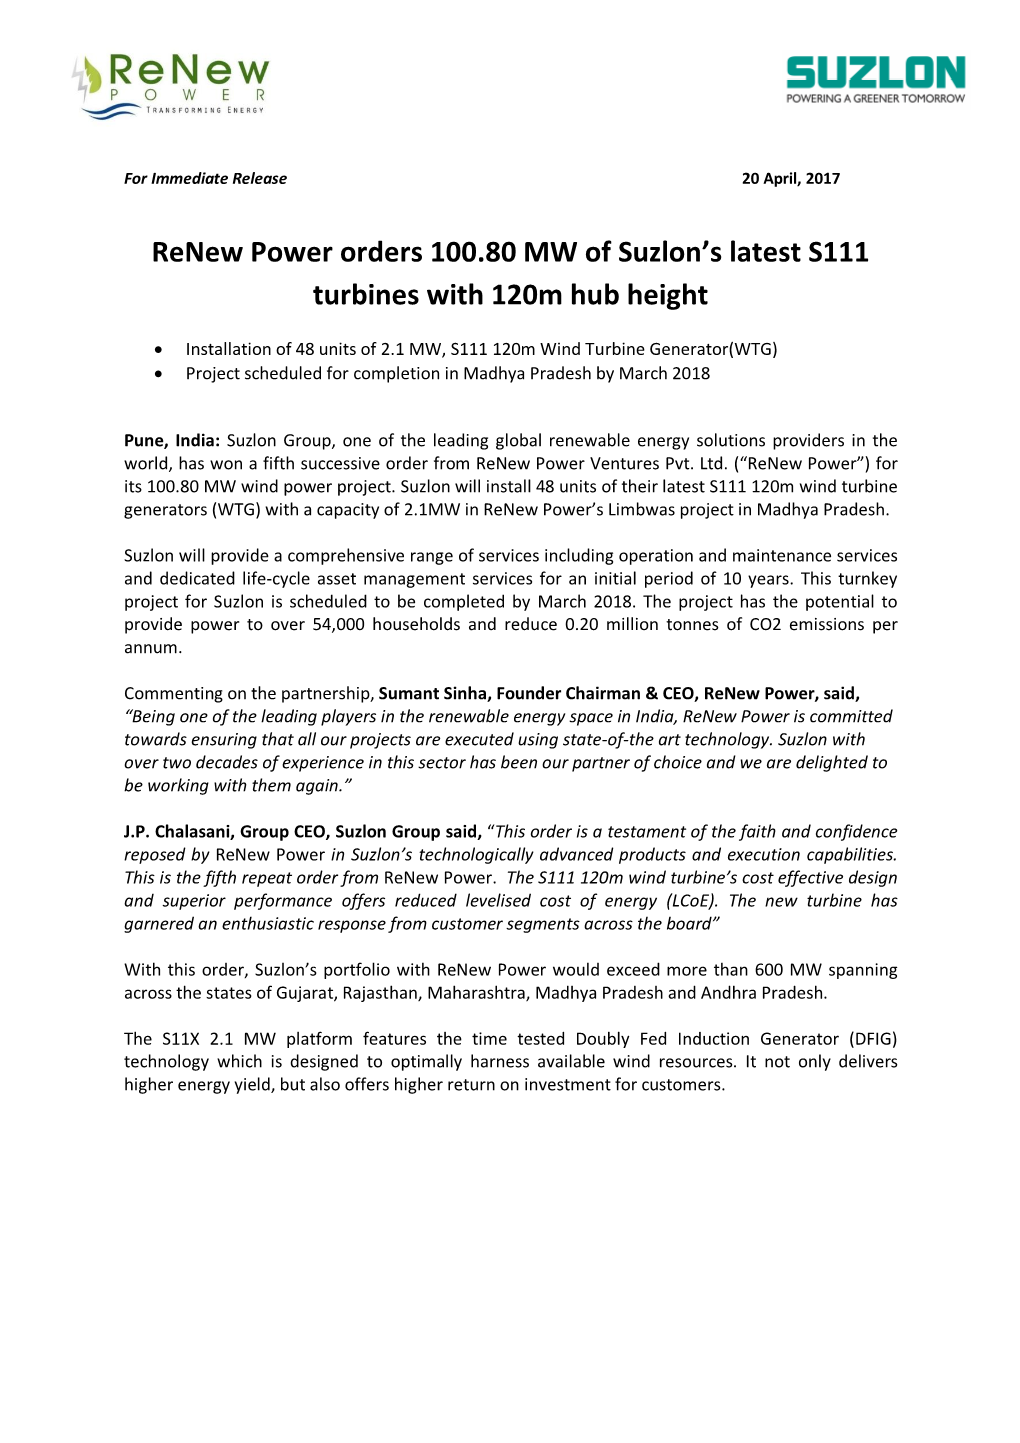 Renew Power Orders 100.80 MW of Suzlon's Latest S111 Turbines With